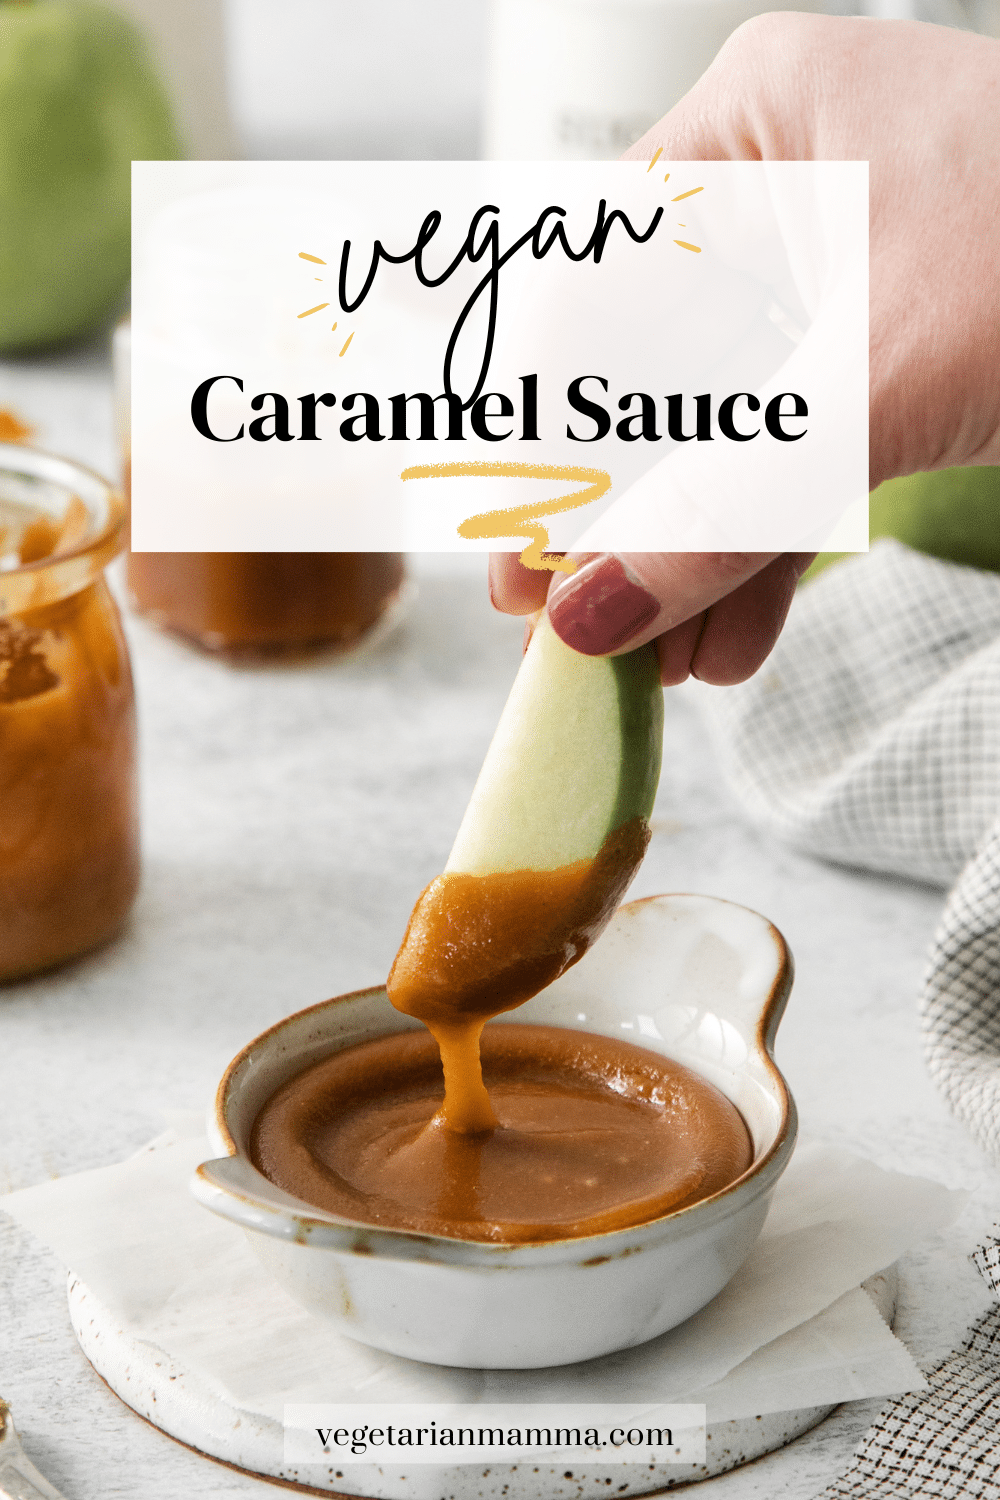 Vegan Caramel Sauce is a no-fuss, dairy free, and deliciously thick recipe that is perfect for pouring over ice cream, making vegan desserts, or sweetening your coffee!